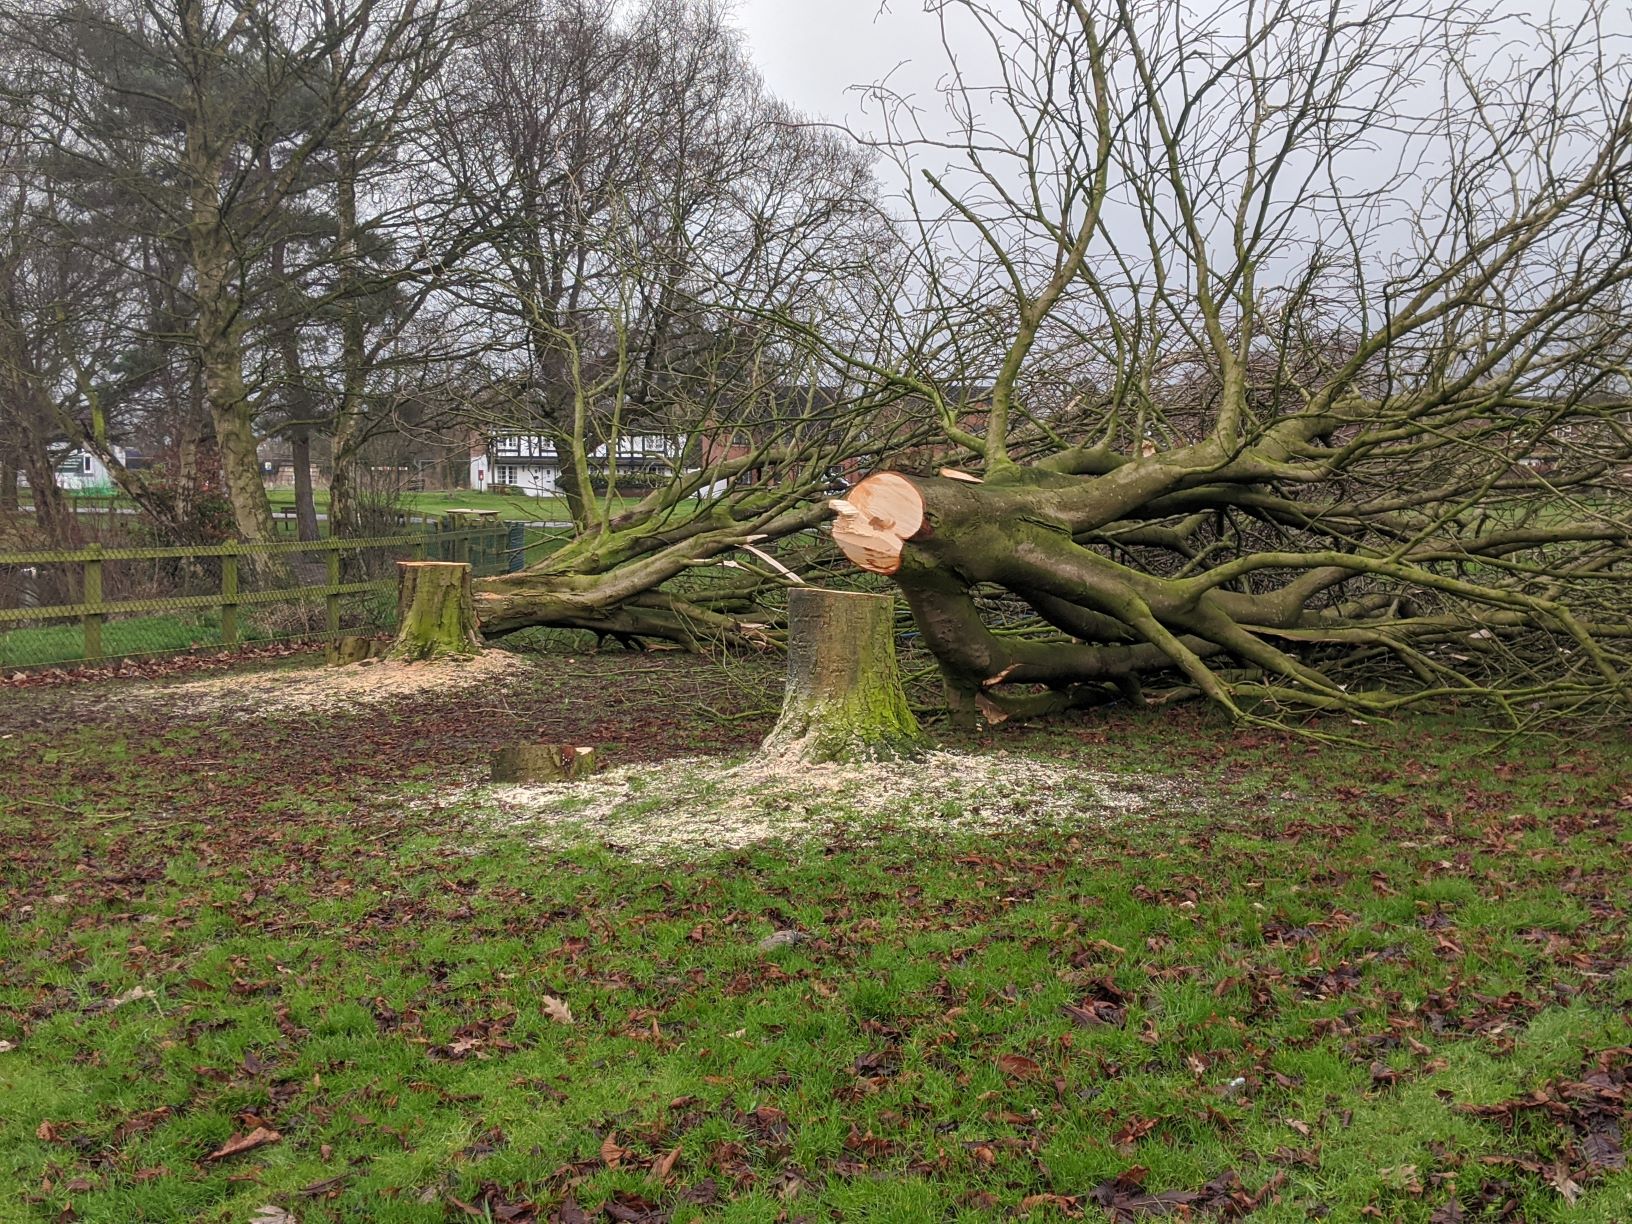 The trees were felled...